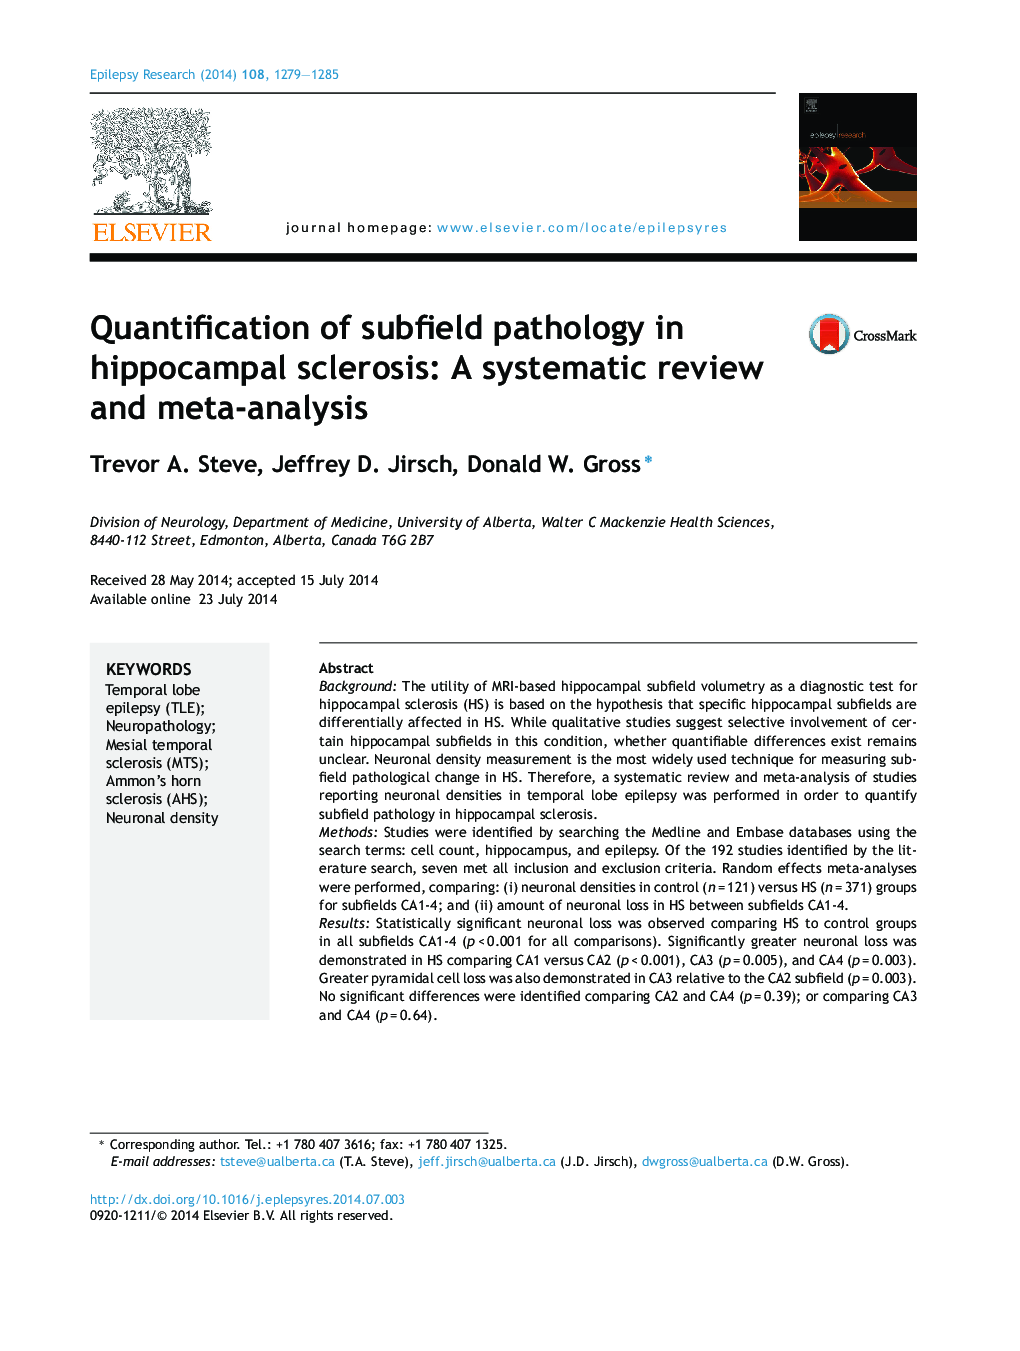 Quantification of subfield pathology in hippocampal sclerosis: A systematic review and meta-analysis